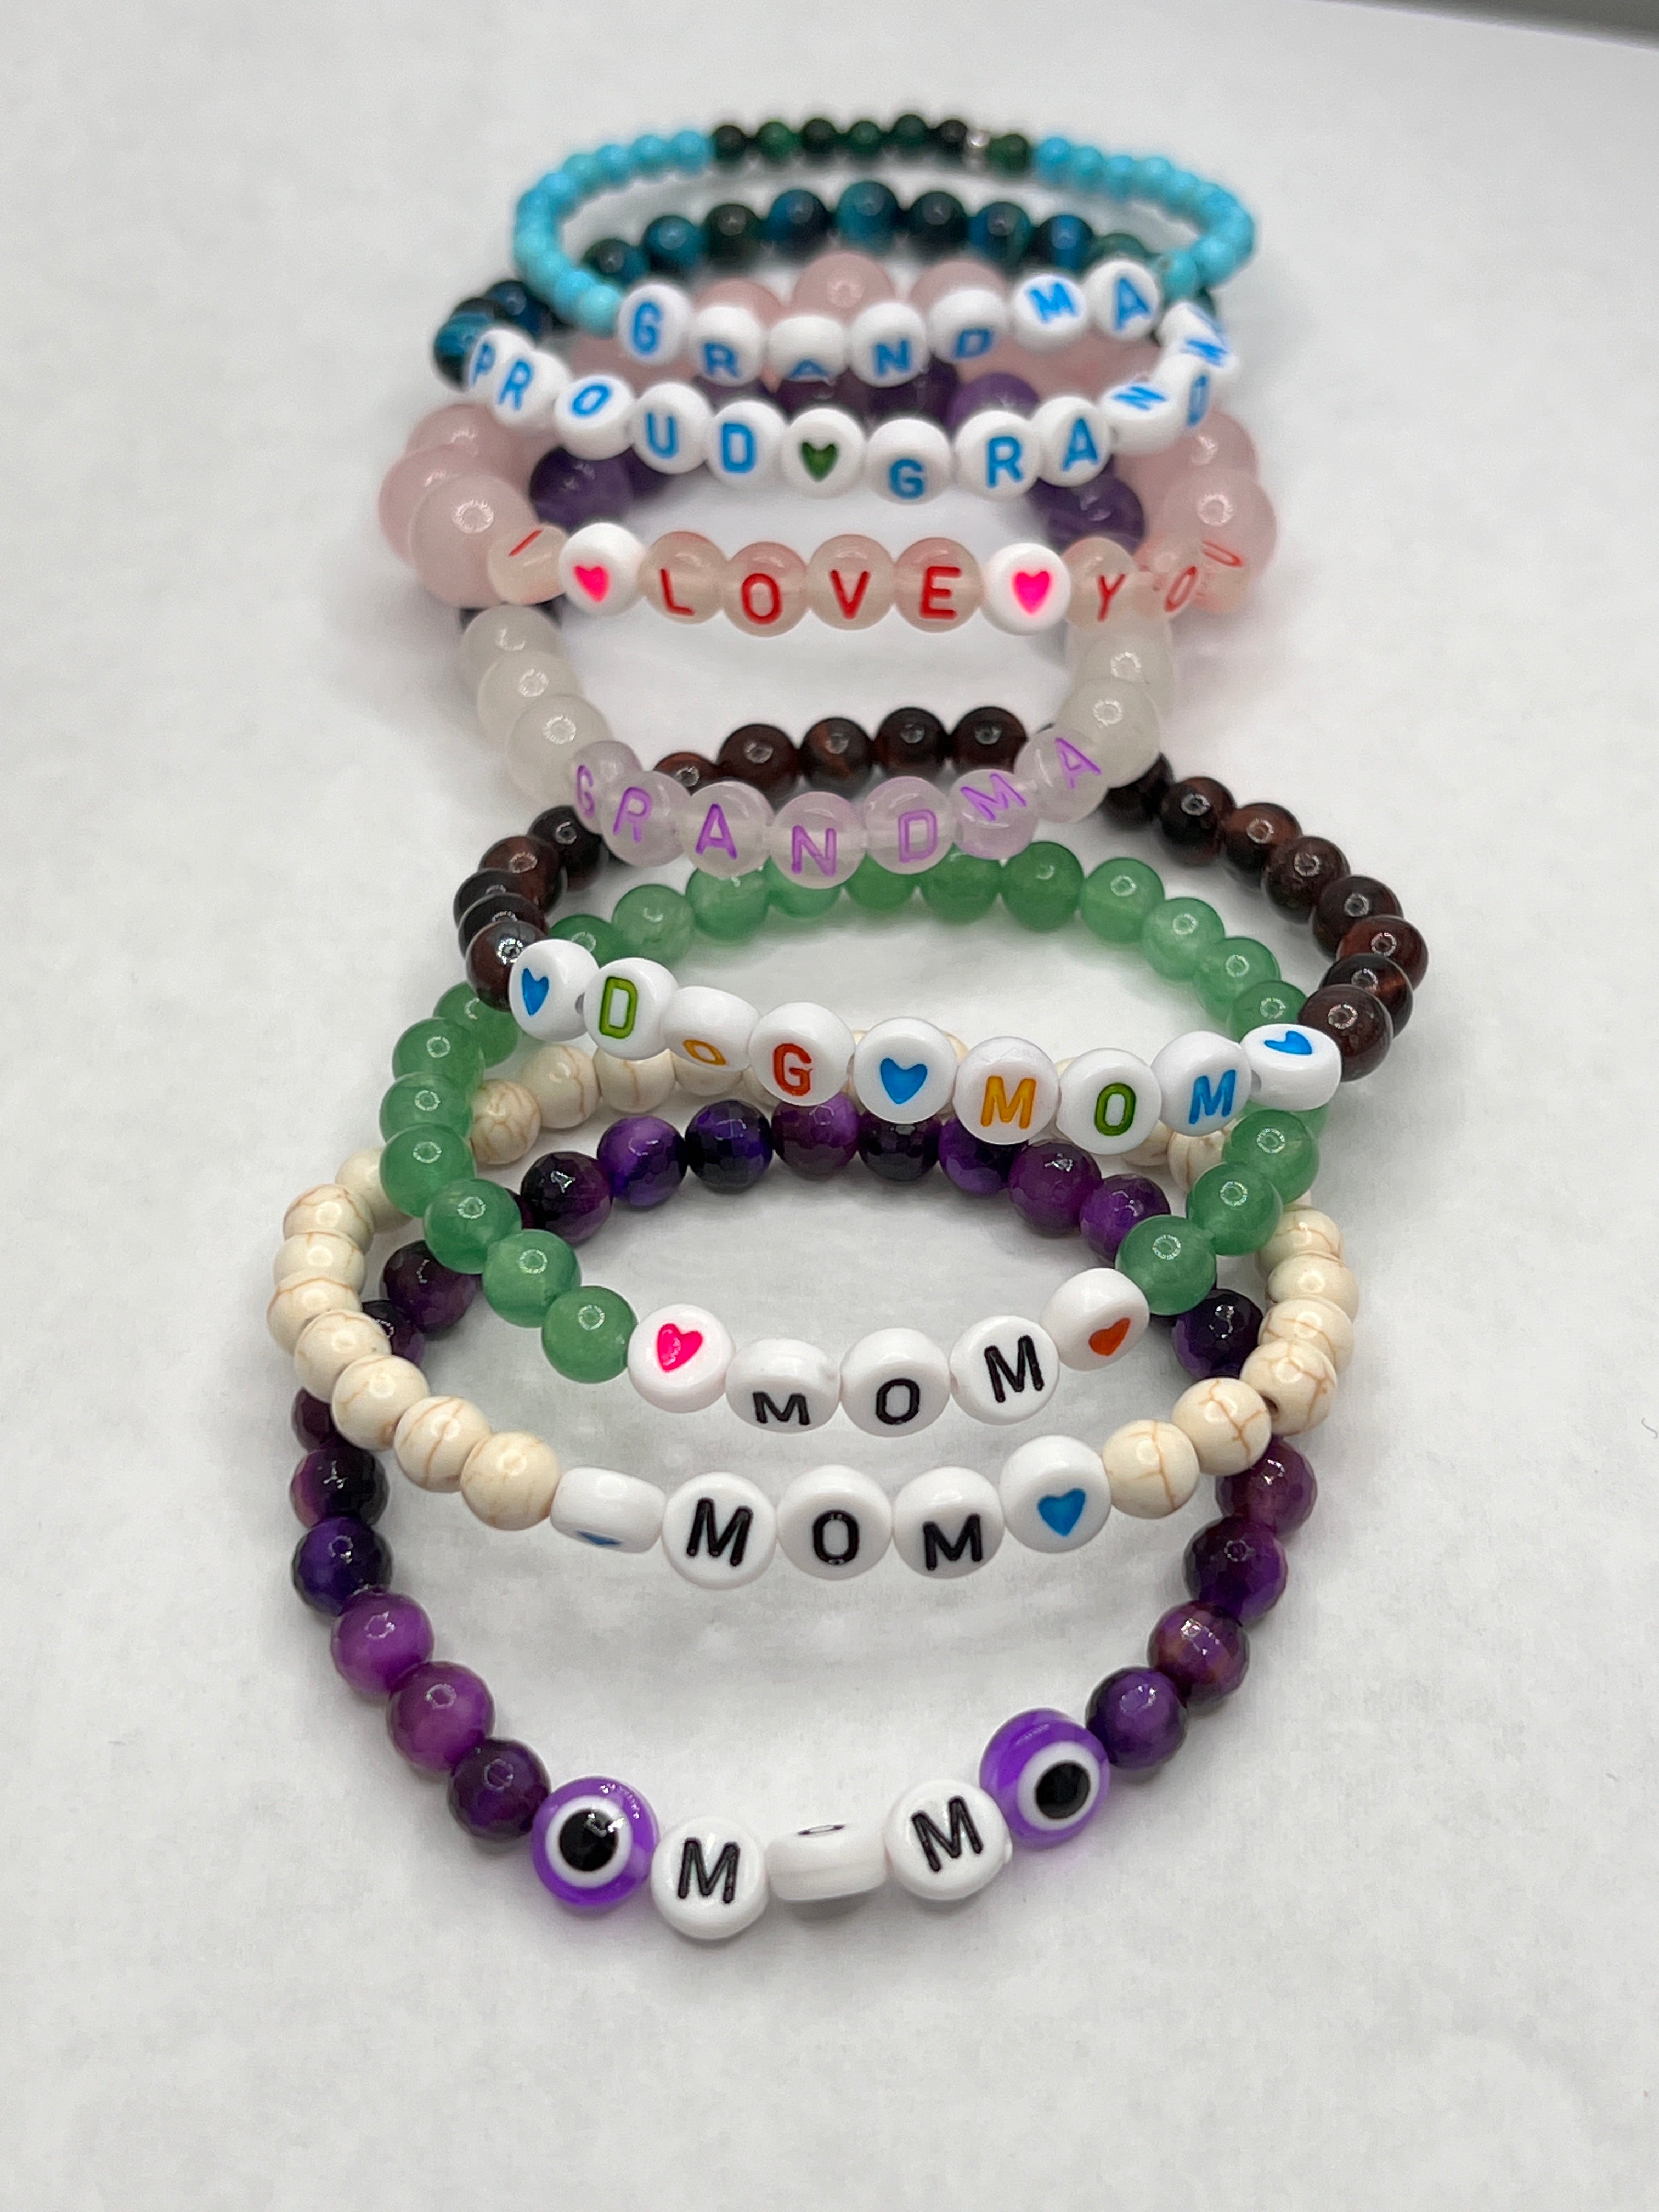 Handcrafted personalized bracelets for meaningful gifts